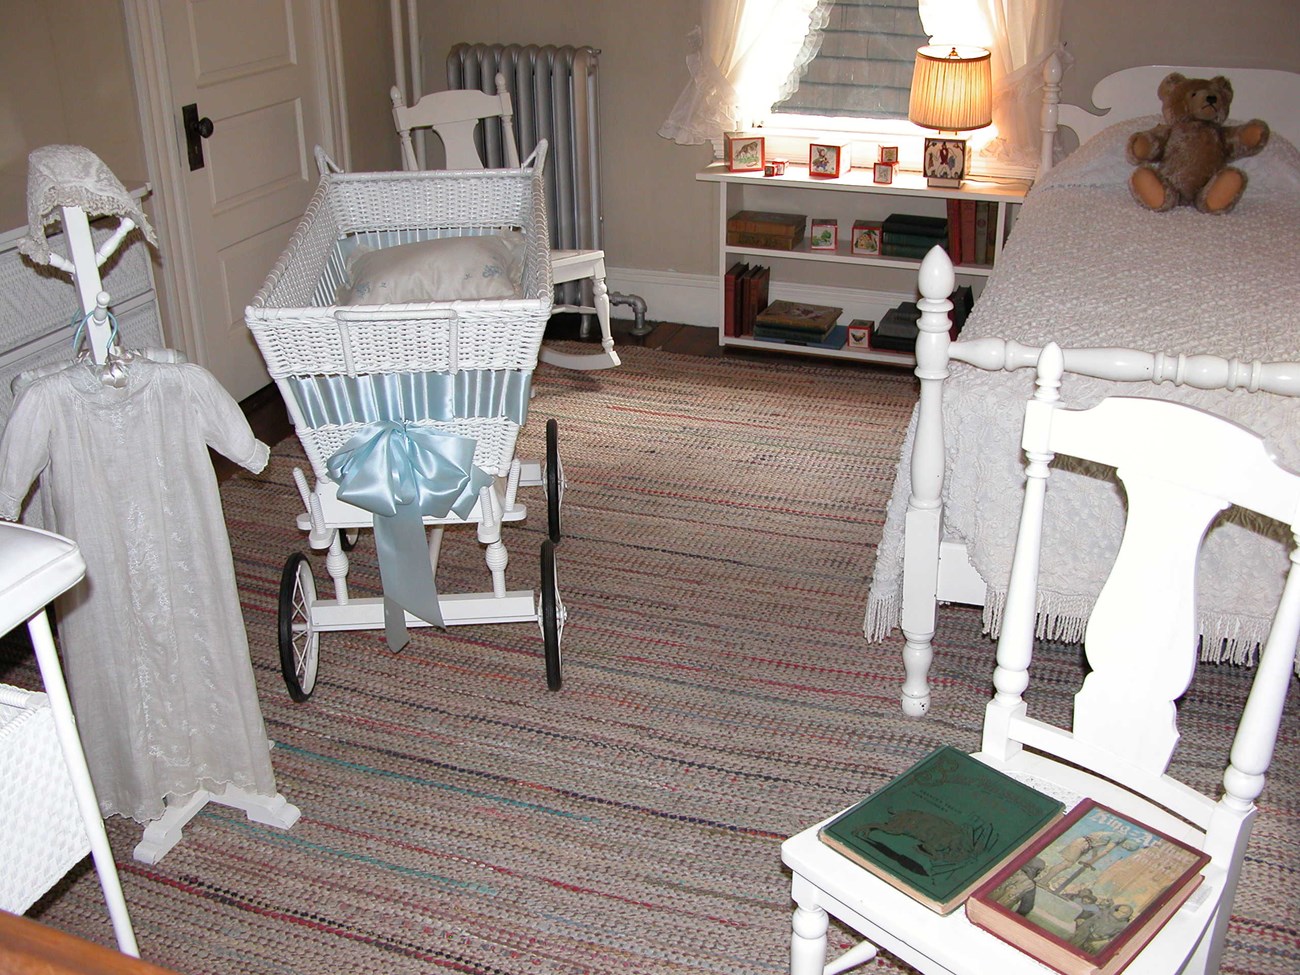 A white bassinet and christening gown at the left of the photo.  A white chair with two children's books is at the right forefront.  Behind the chair is a white twin bed with a teddy bear on top.  A white bookcase sits to the left of the bed.